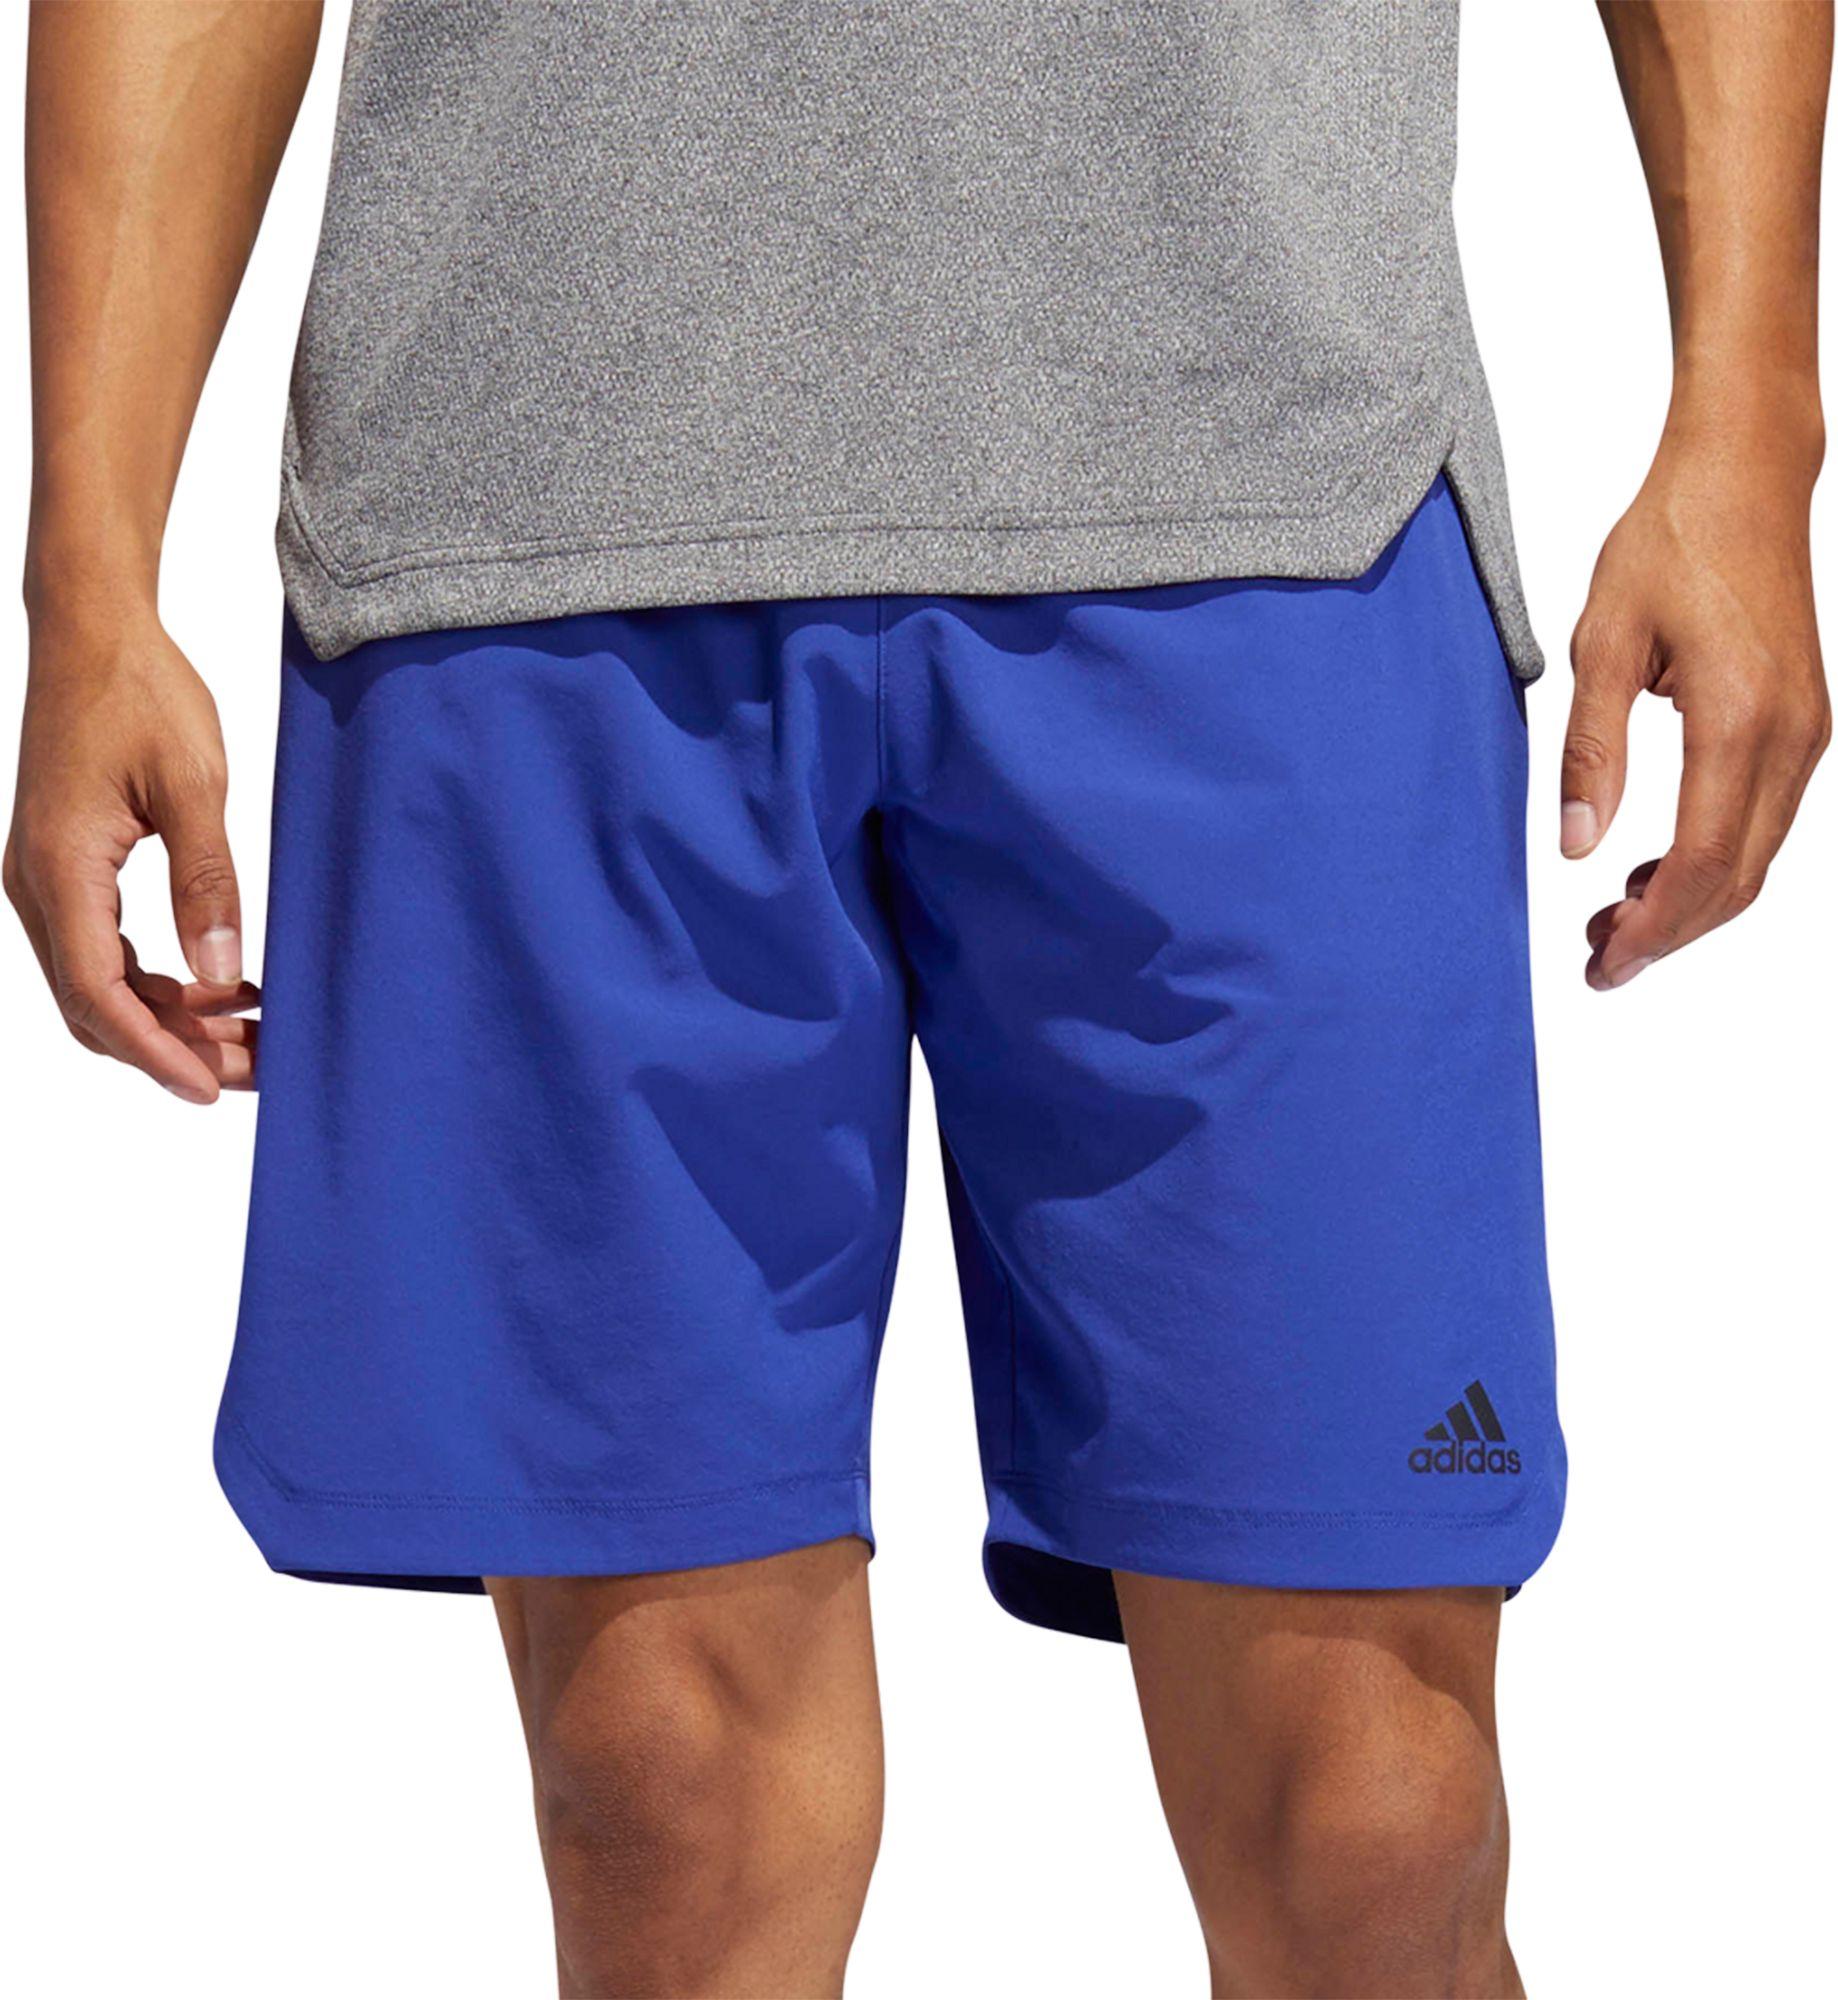 adidas Axis Woven Training Shorts in Blue for Men - Lyst